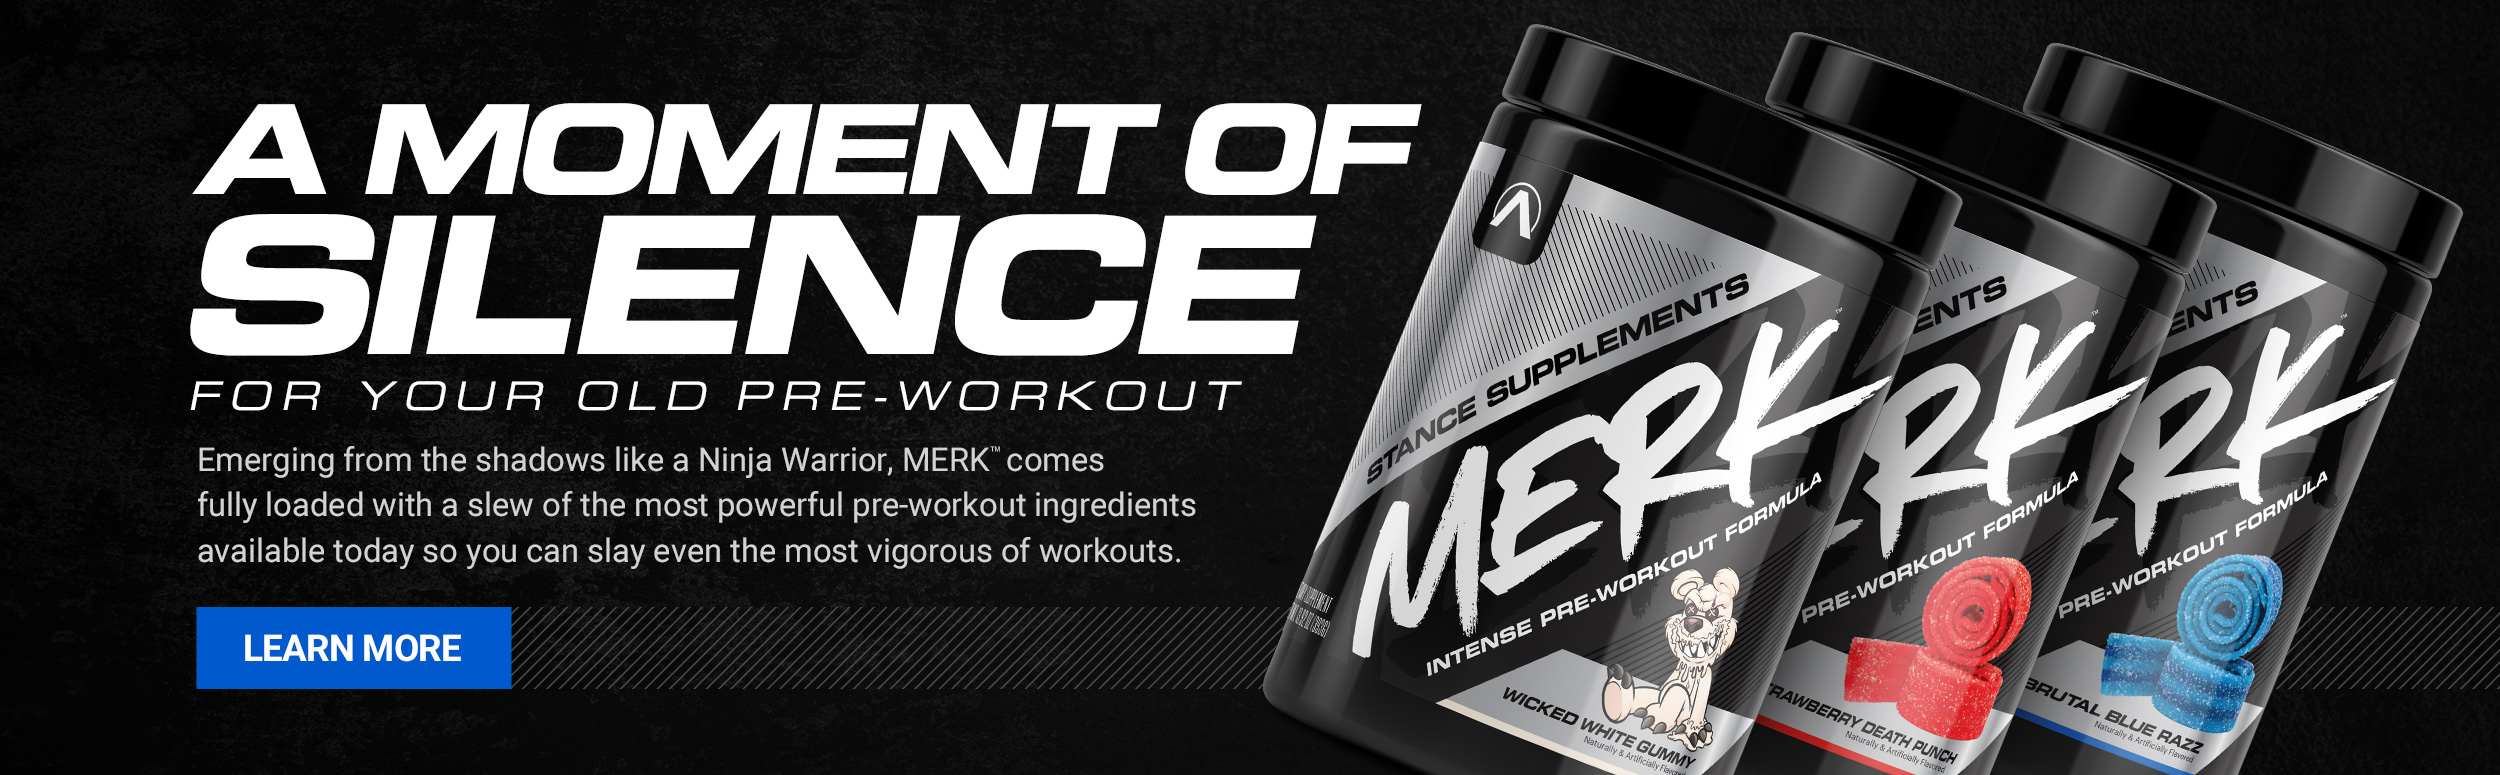 Stance Supplements MERK - A moment of silence for your old pre-workout - Click to learn more